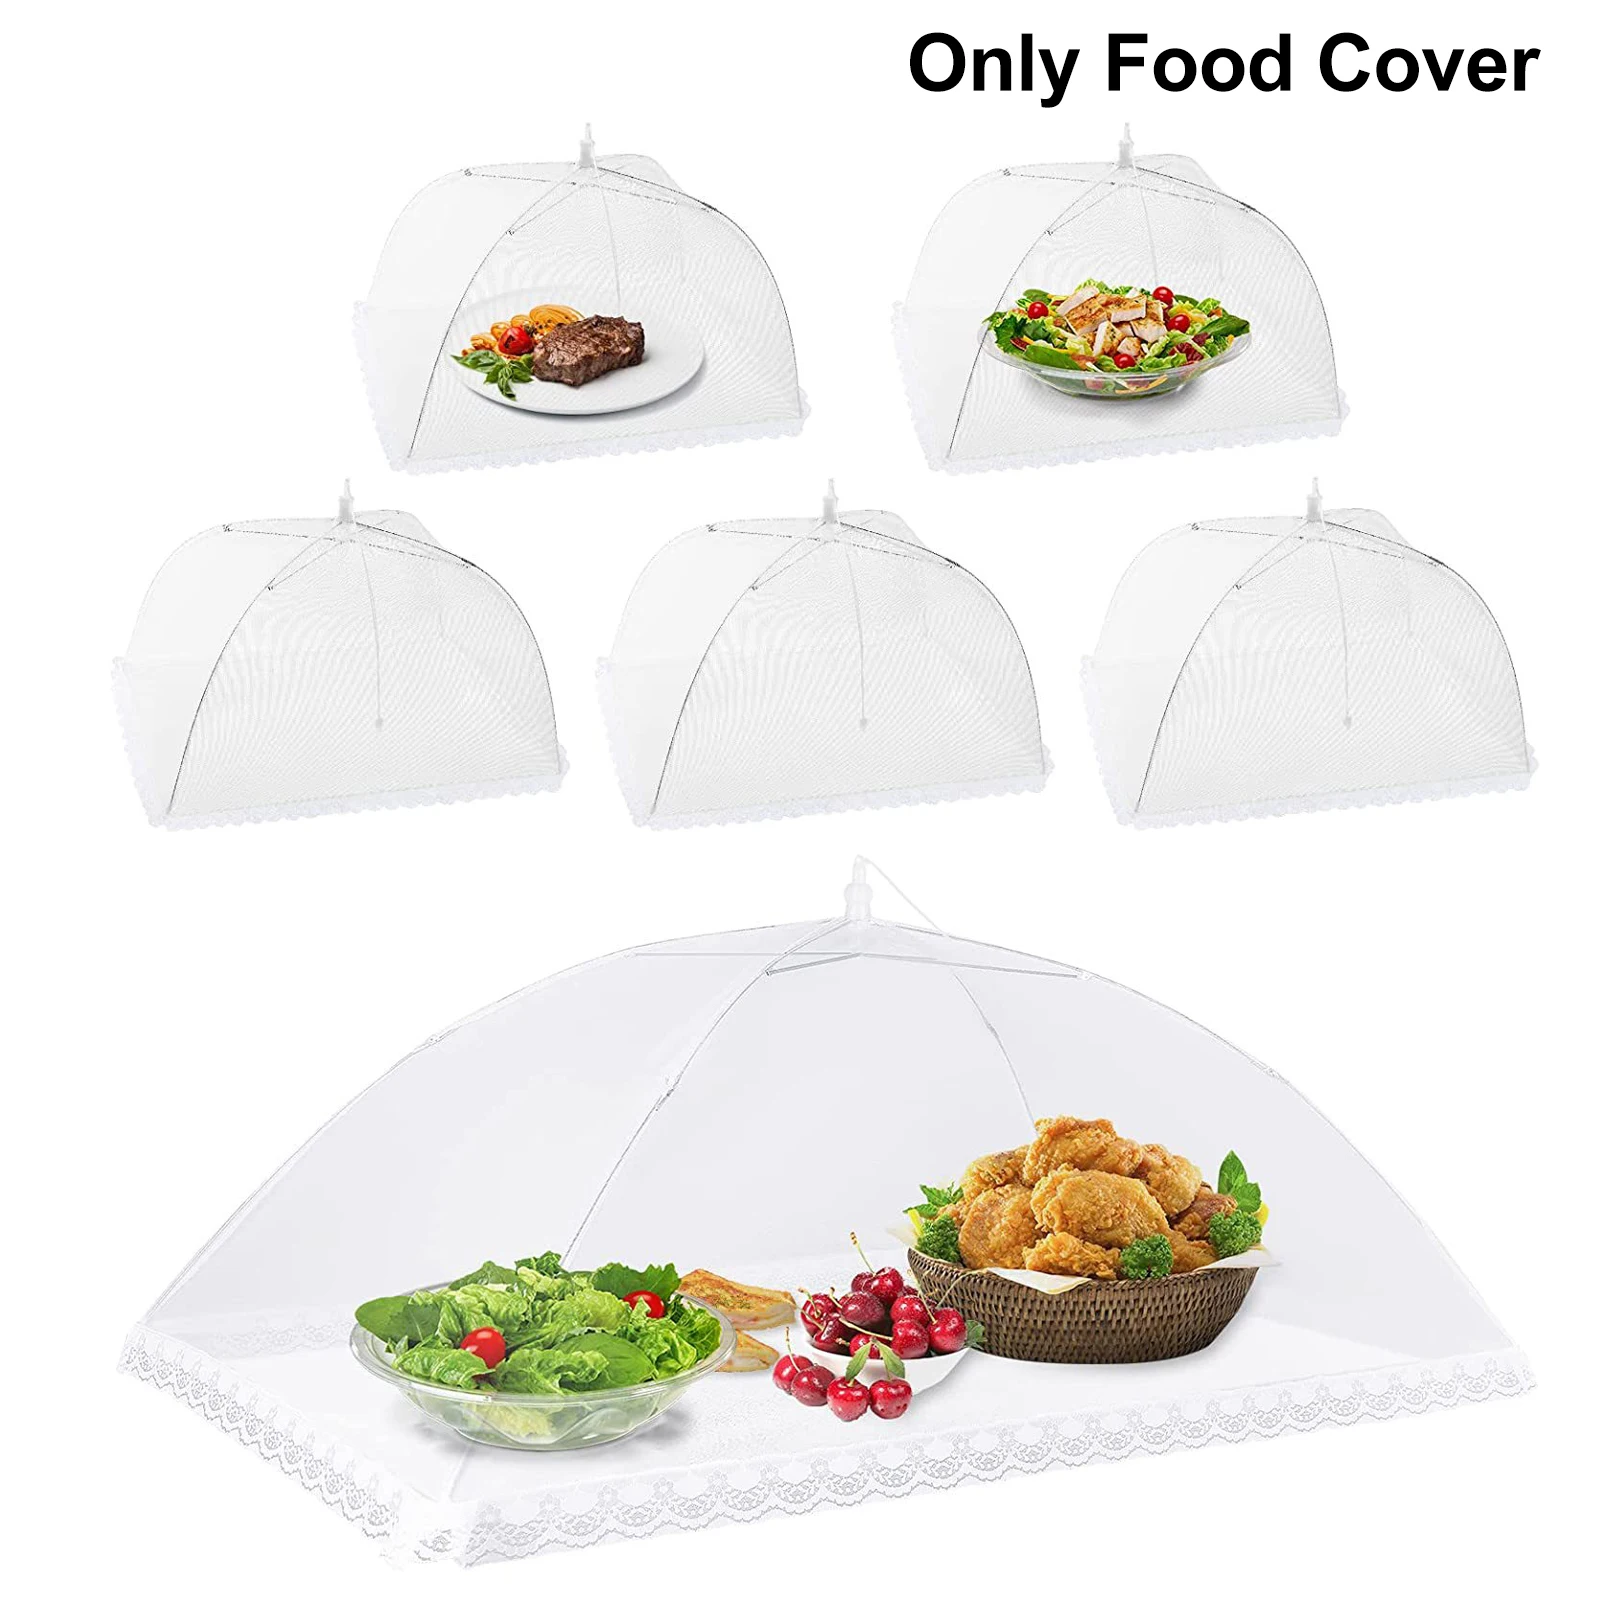 

6pcs Reusable Dustproof Food Cover Party BBQ Foldable Washable Tent Umbrella Indoor Outdoor Fine Mesh Net Dome Multifunctional